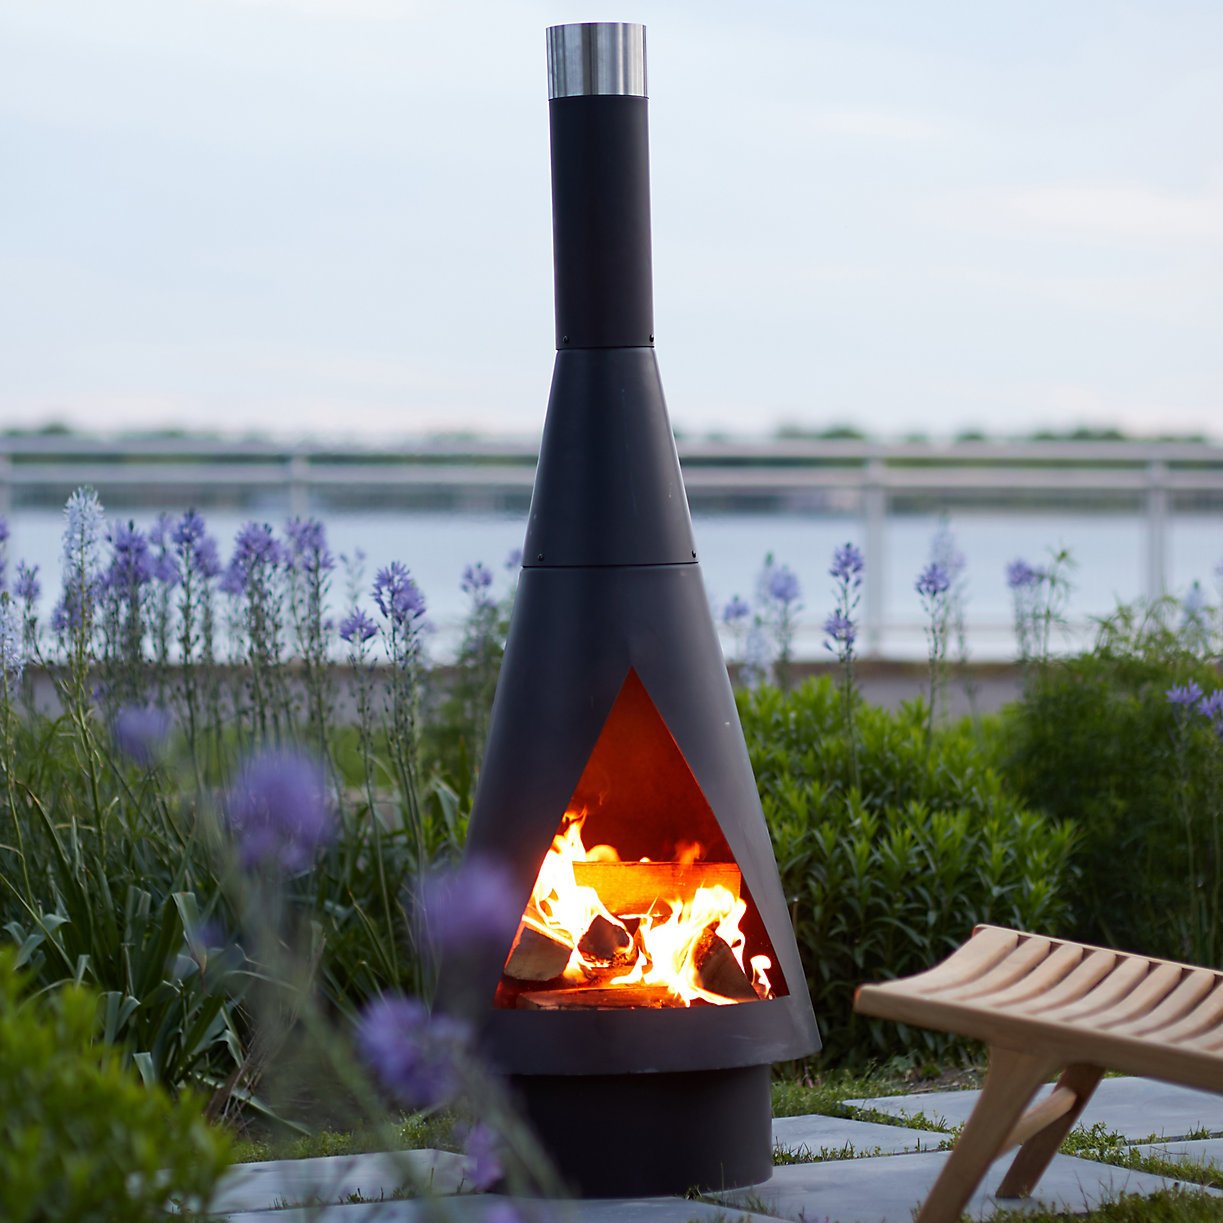 Terrain Angled Obelisk Chiminea - Go up with this elevated, geometric chiminea. Welded from a single piece of weathering steel, this timeless wood-burning outdoor fireplace will develop a beautiful patina over time. SHOP NOW >” loading=”lazy”></noscript><br />
<img decoding=